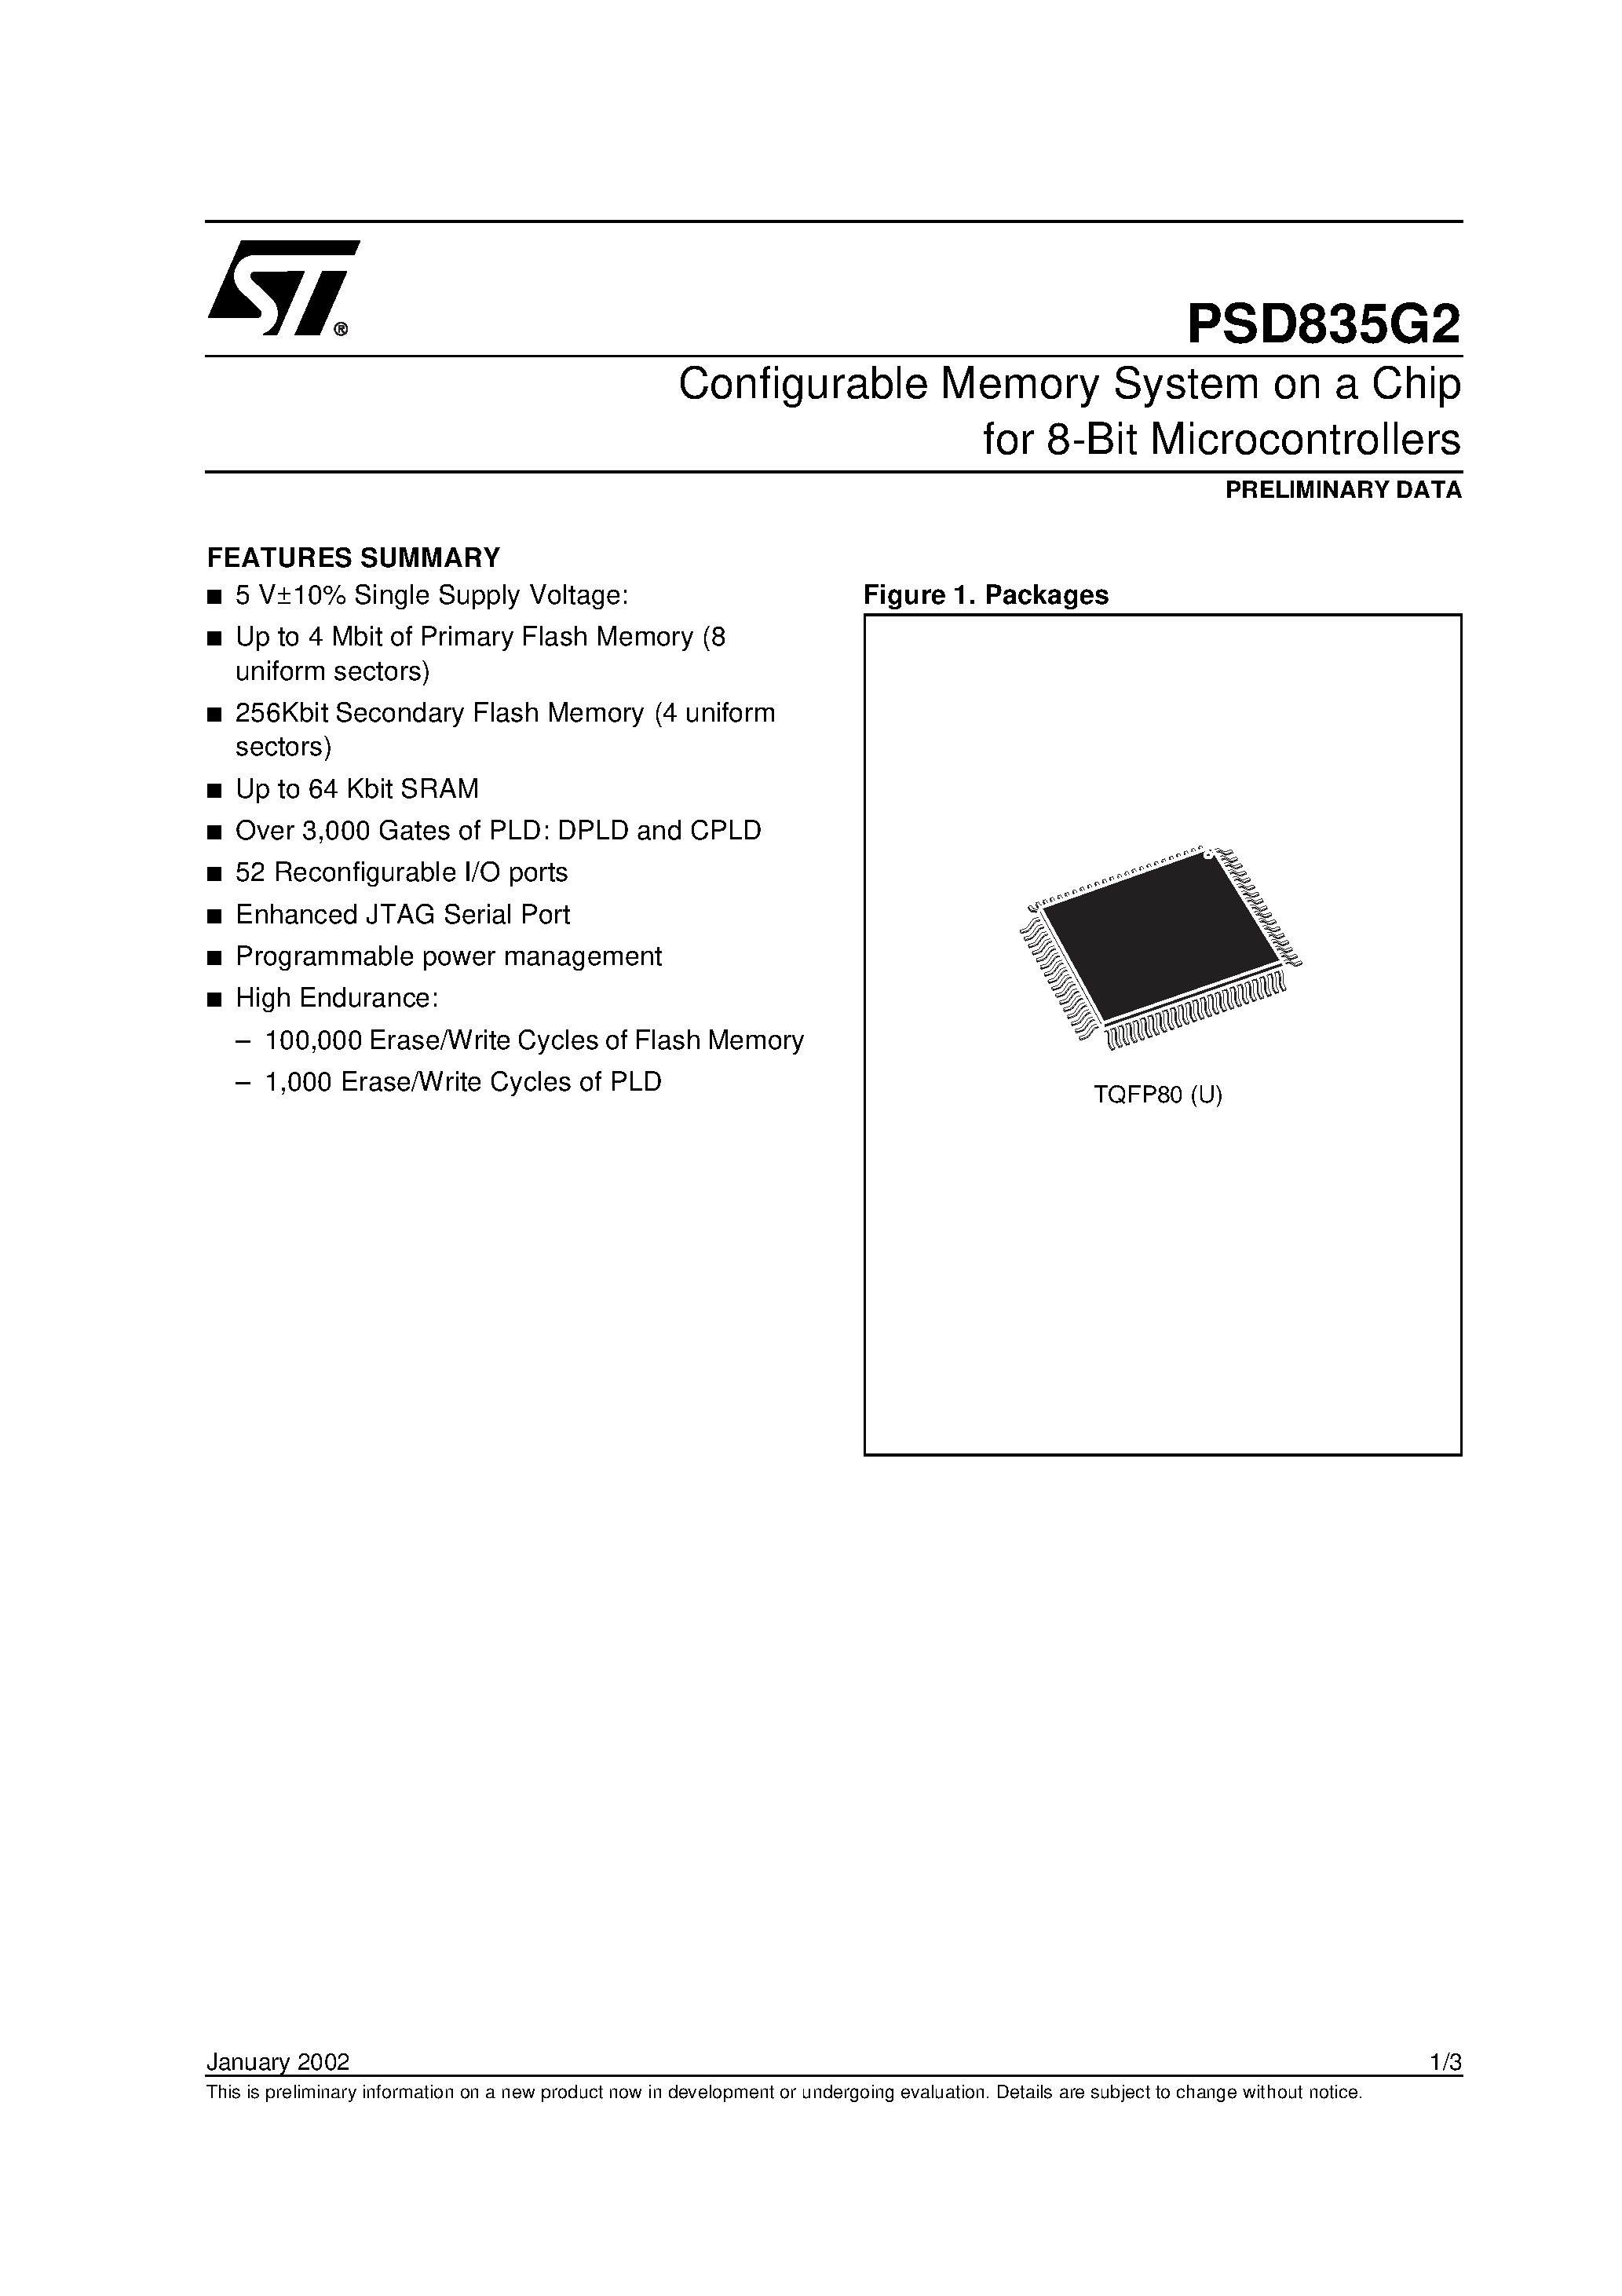 Datasheet PSD835F2V-A-20UI - Configurable Memory System on a Chip for 8-Bit Microcontrollers page 1